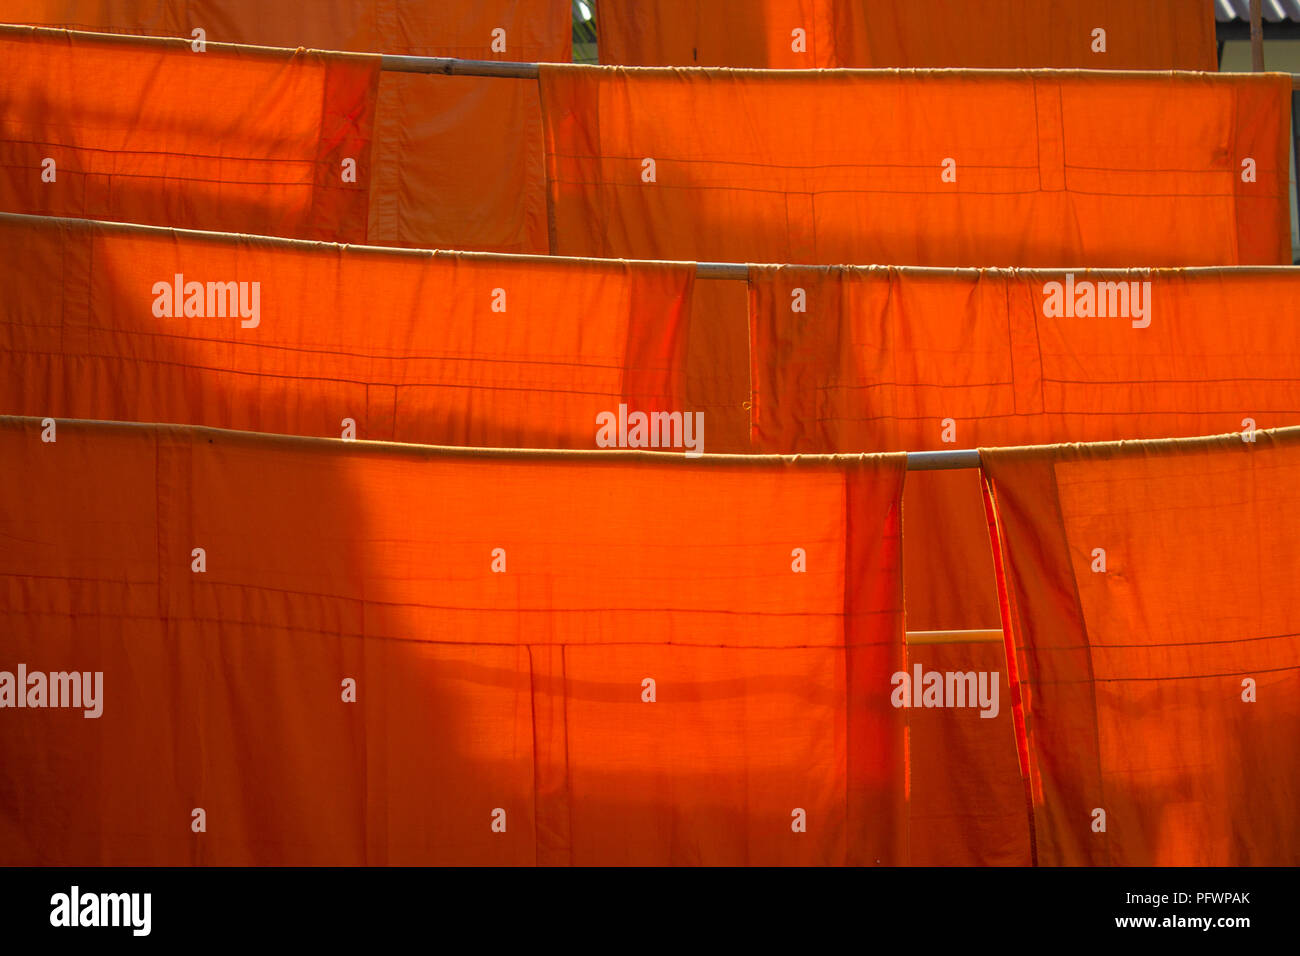 Buddhist monk's robes hanging out to dry - Wat Phan Tao, Chiang Mai Stock Photo